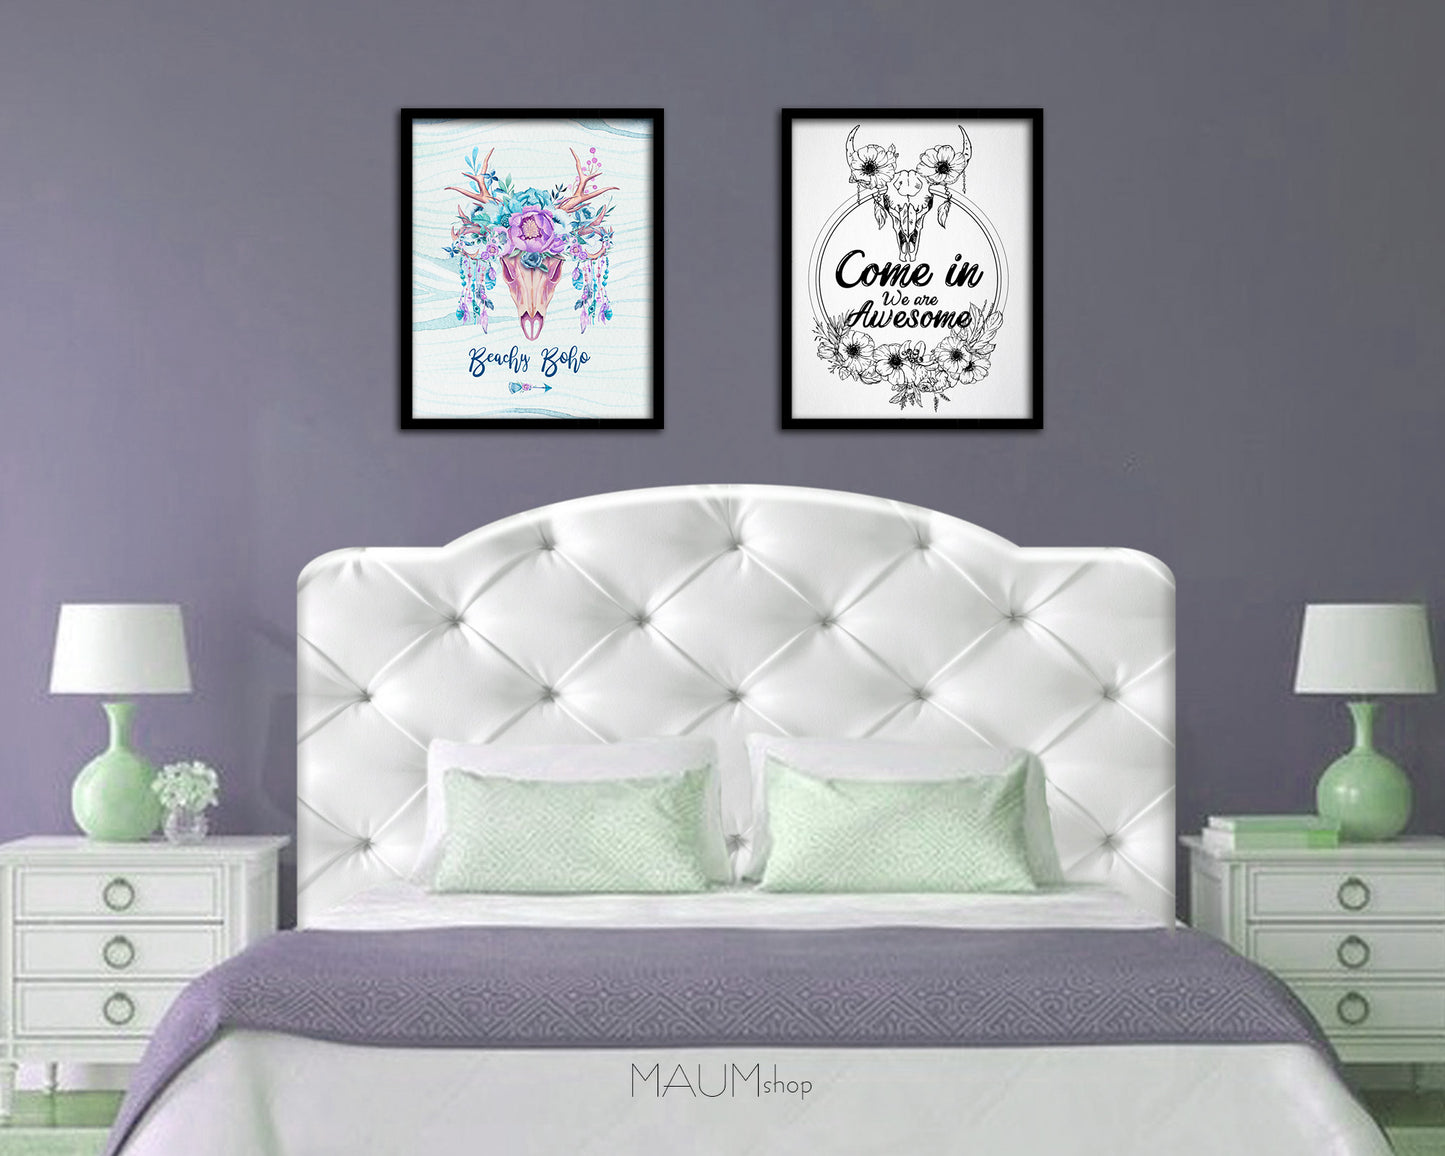 Come in we are awesome Quote Framed Print Wall Decor Art Gifts